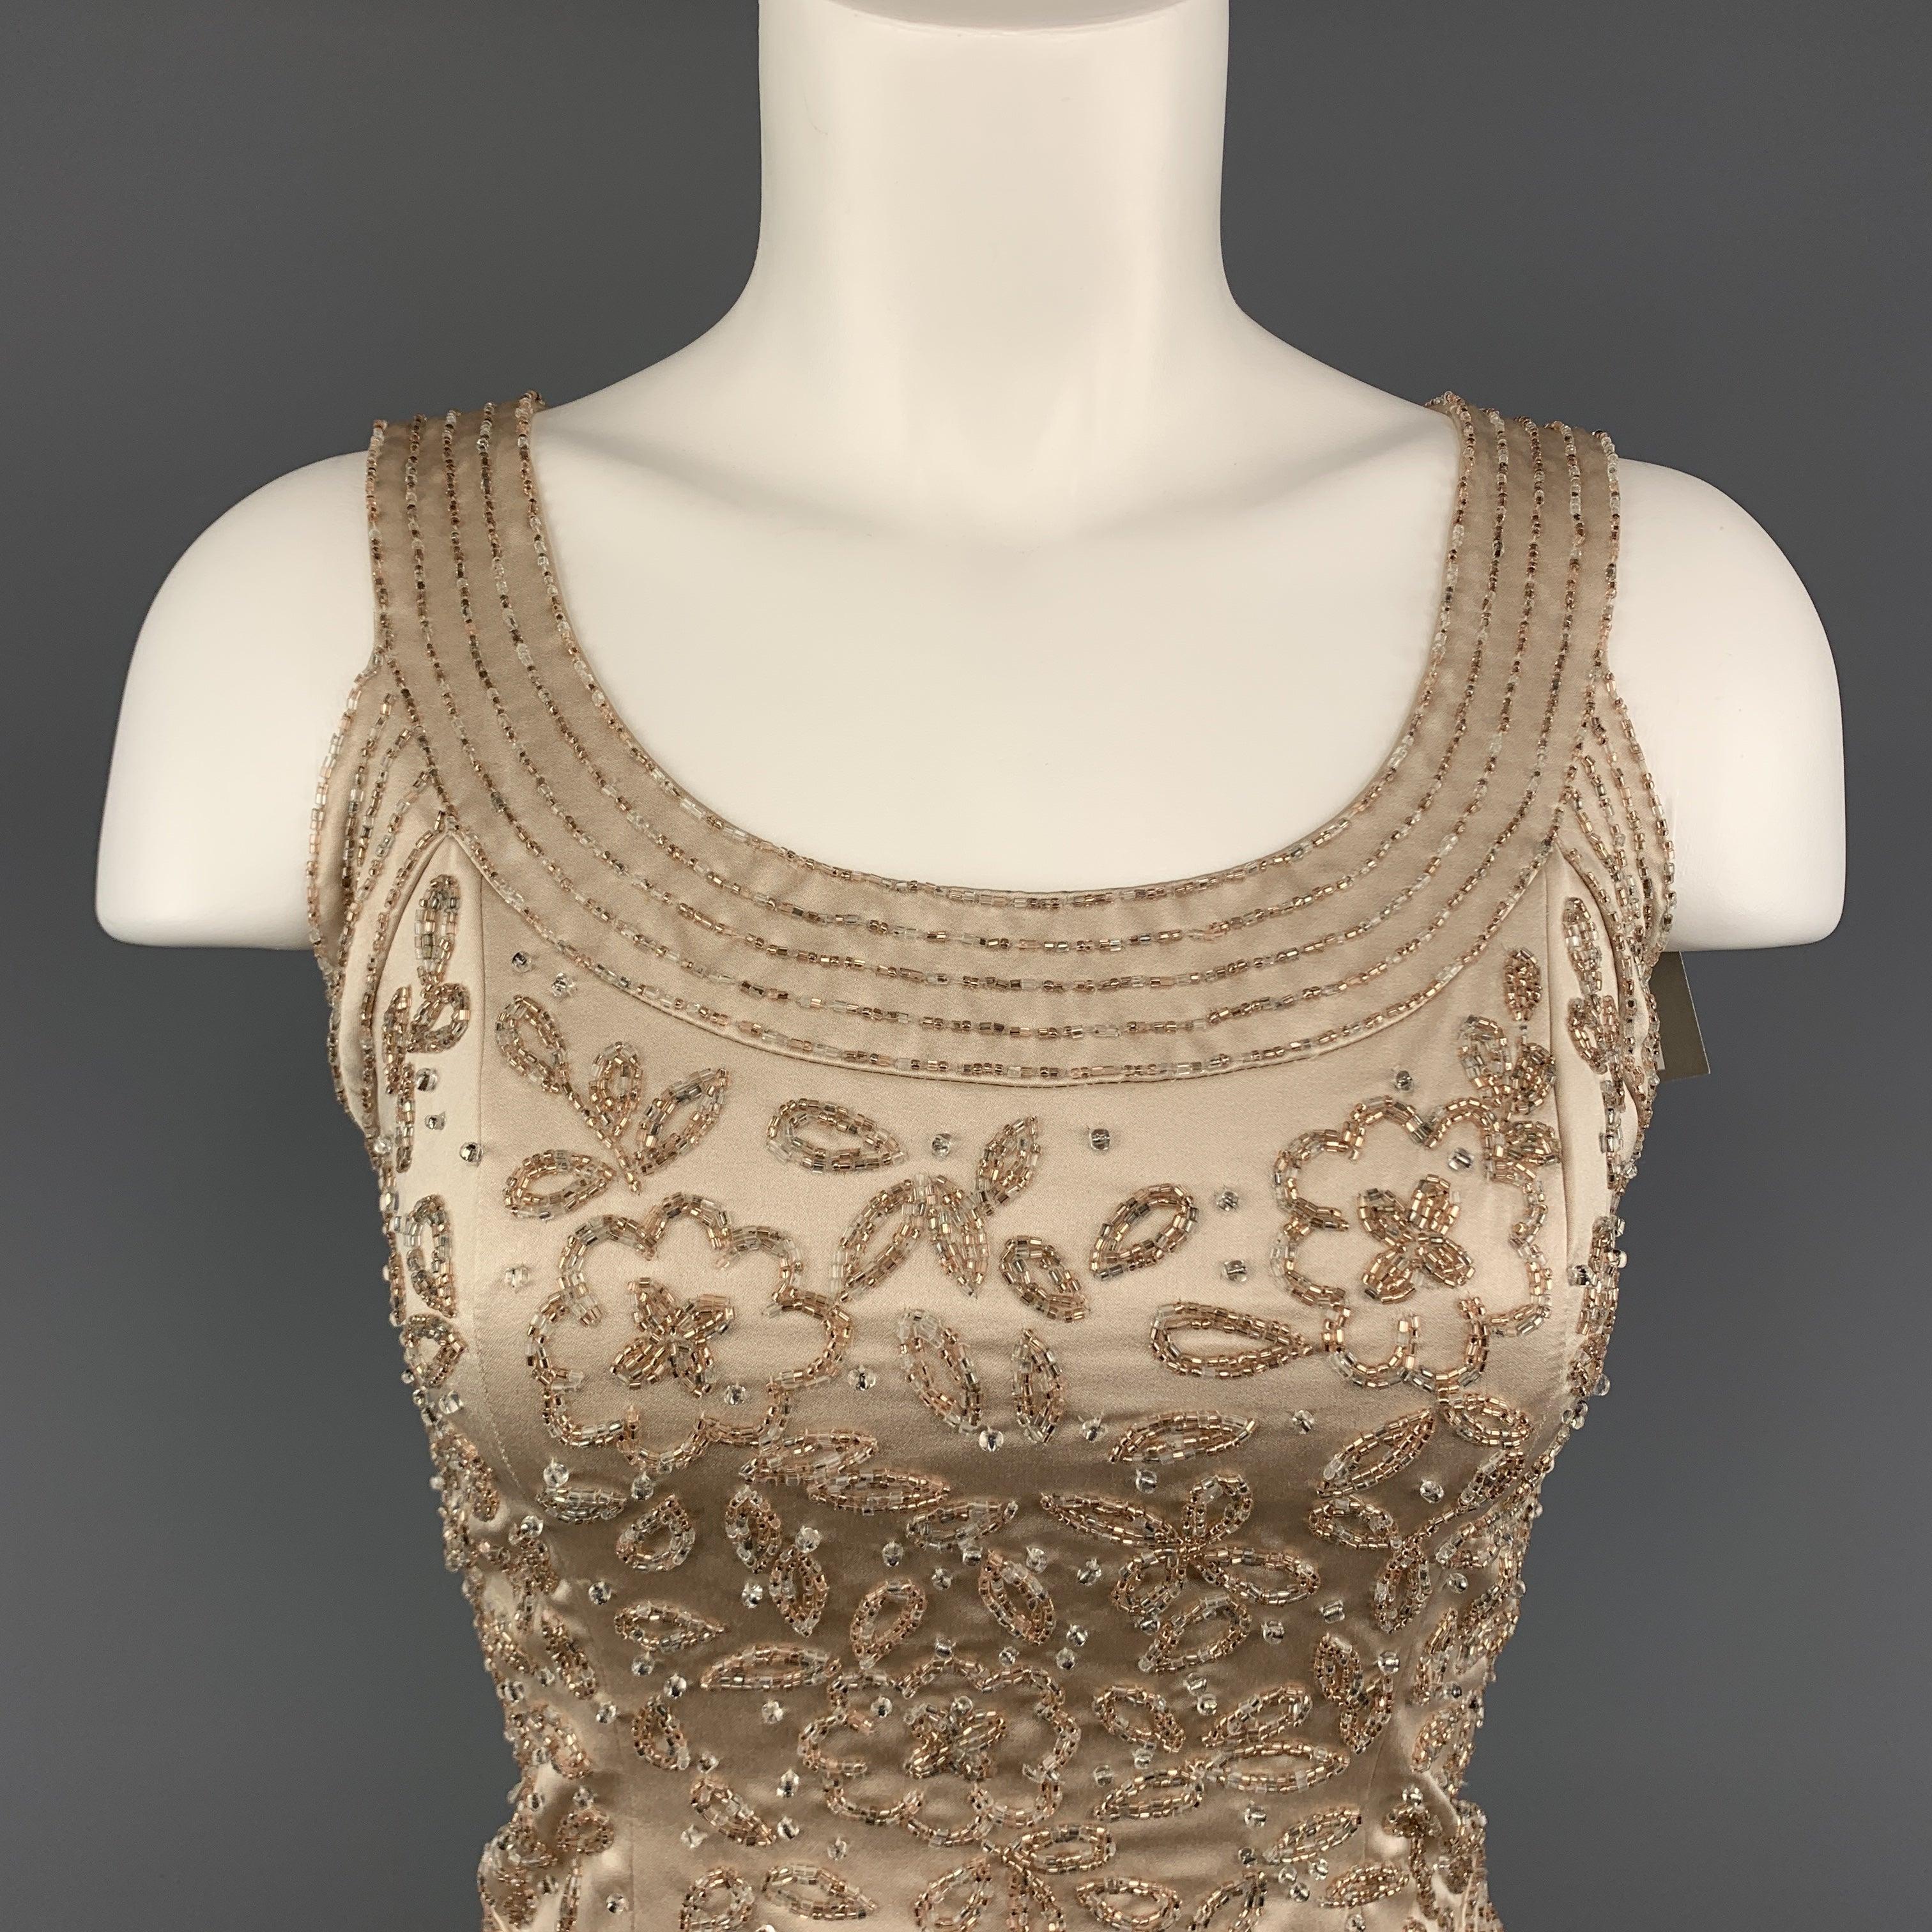 Vintage NEIMAN MARCUS shell bustier top comes in beige satin with a scoop neckline back zip closure, and beaded floral motif. Excellent Pre-Owned Condition. 

Marked:   2 P 

Measurements: 
 
Shoulder: 13 inches Bust: 34 inches Length: 17.5 inches 
